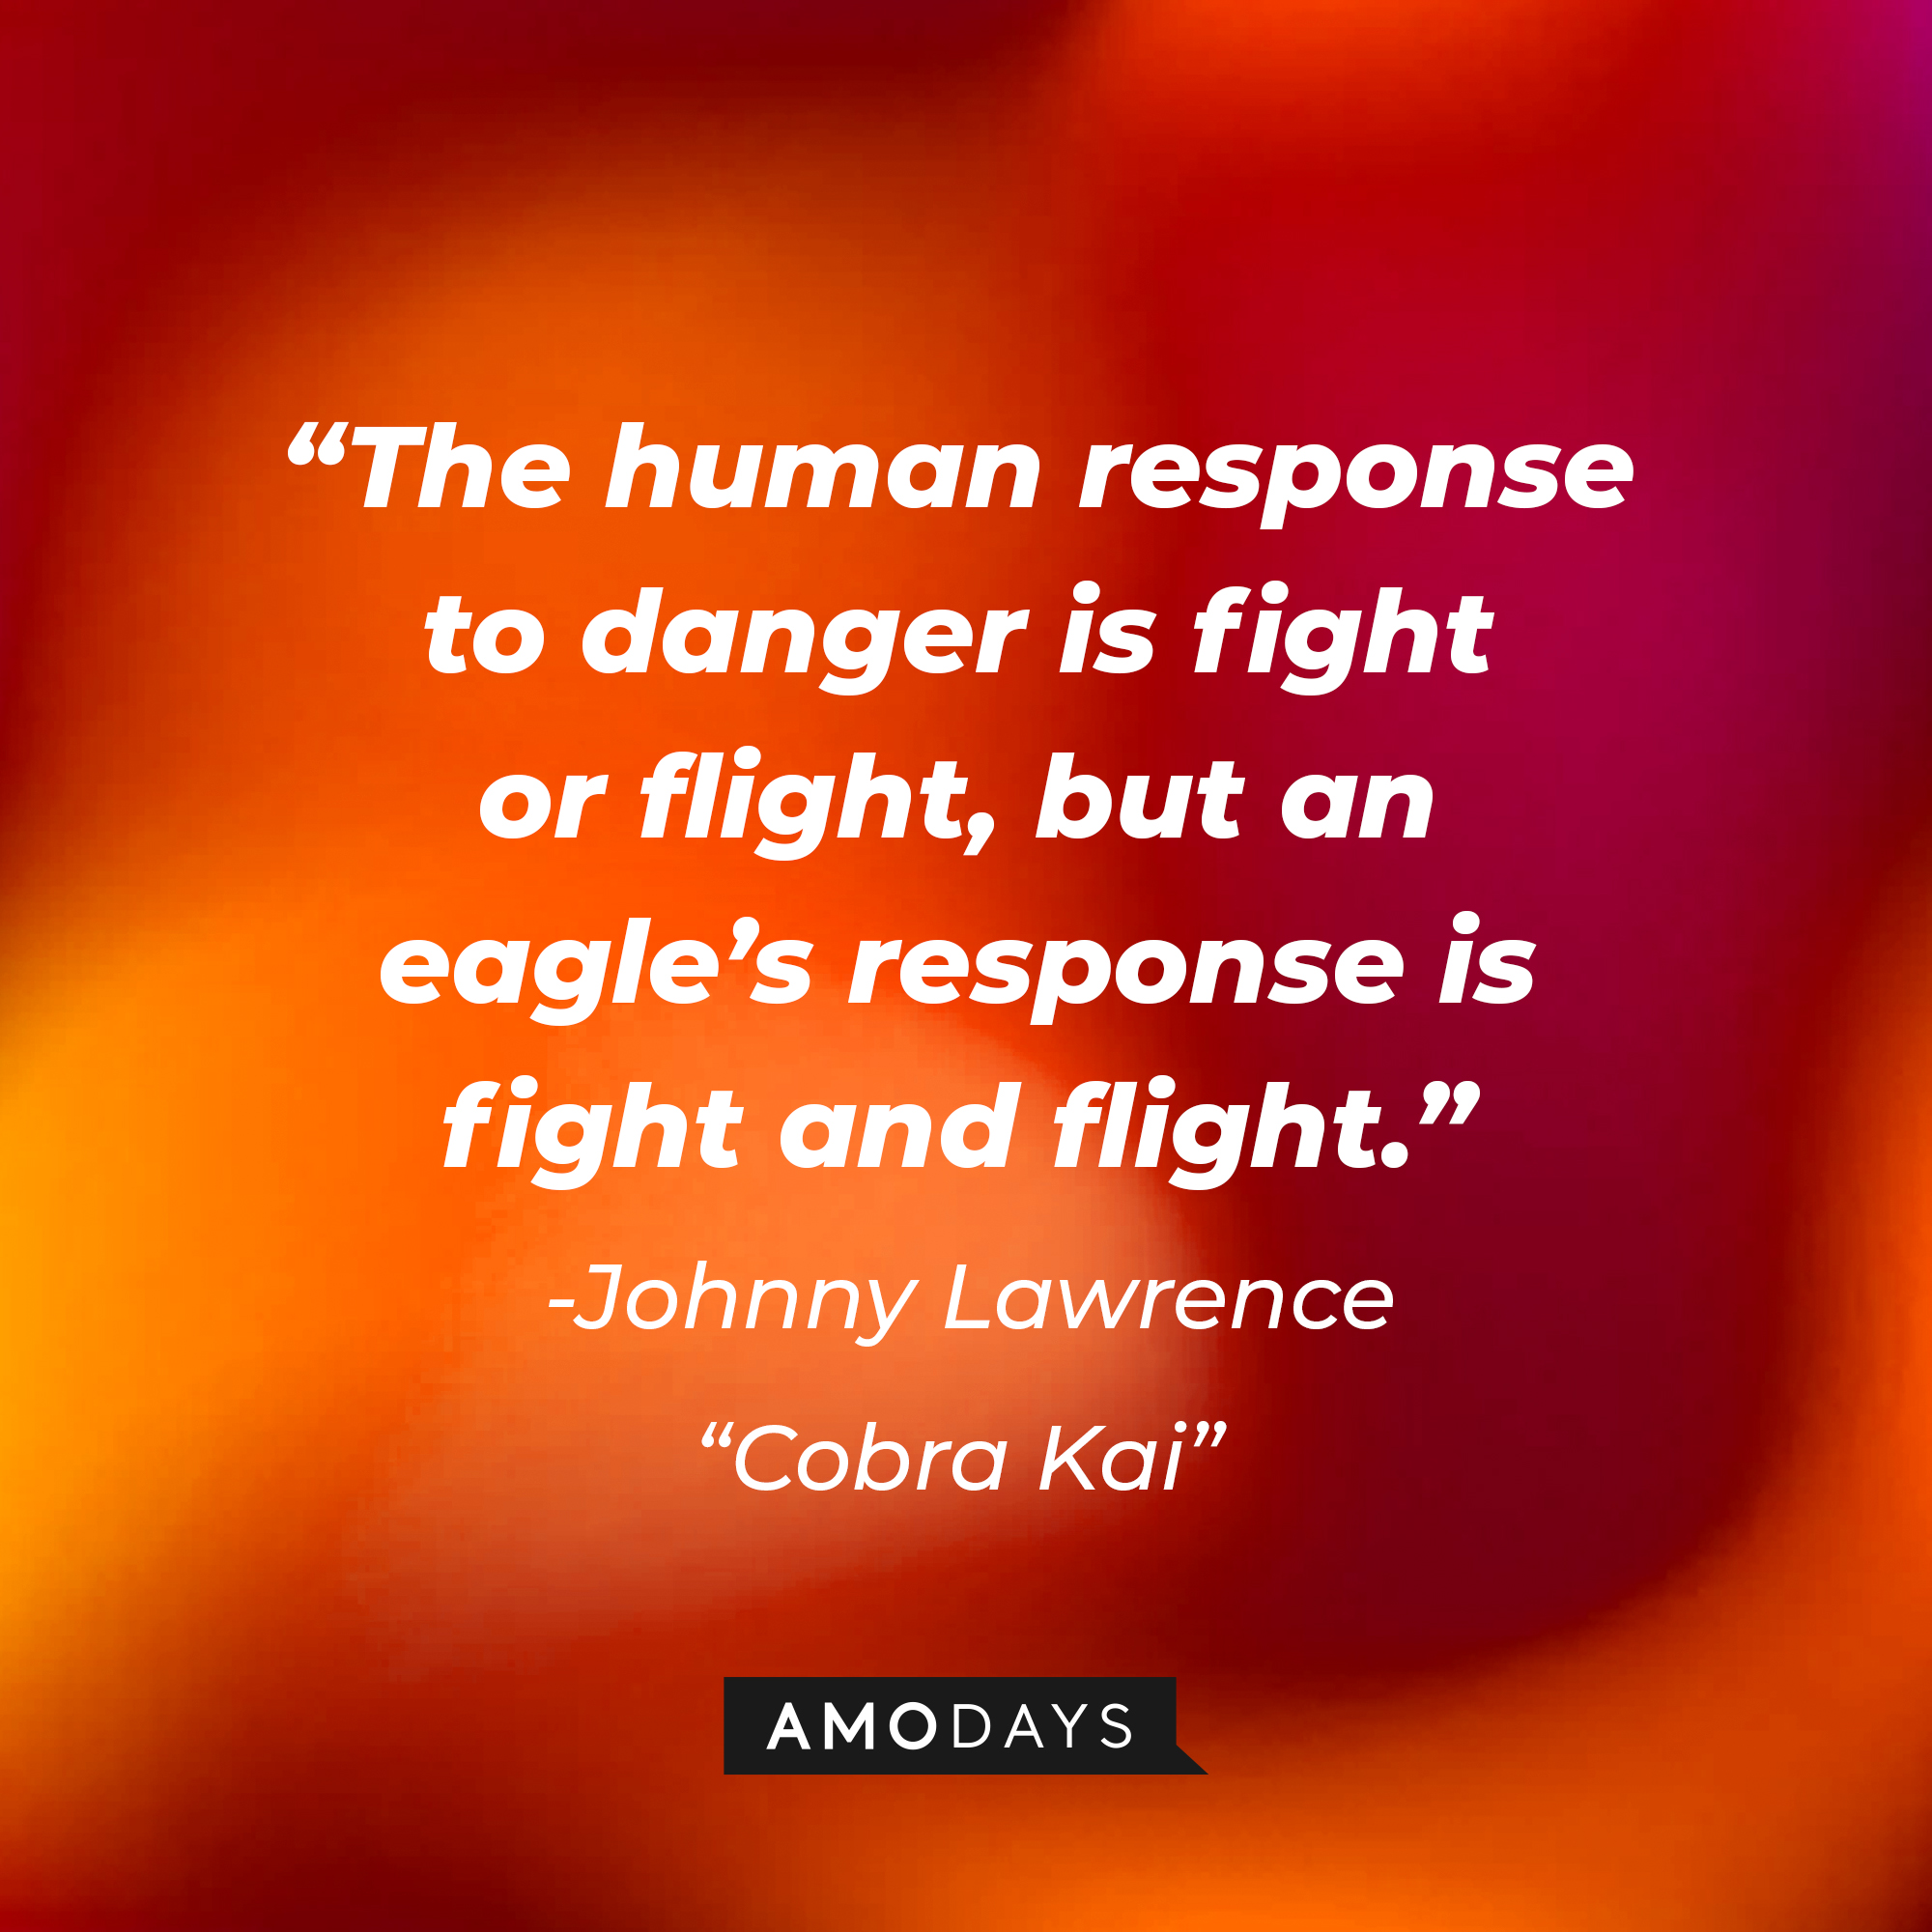 Johnny Lawrence's quote from "Cobra Kai:" “The human response to danger is fight or flight, but an eagle’s response is fight and flight.” | Source: AmoDays